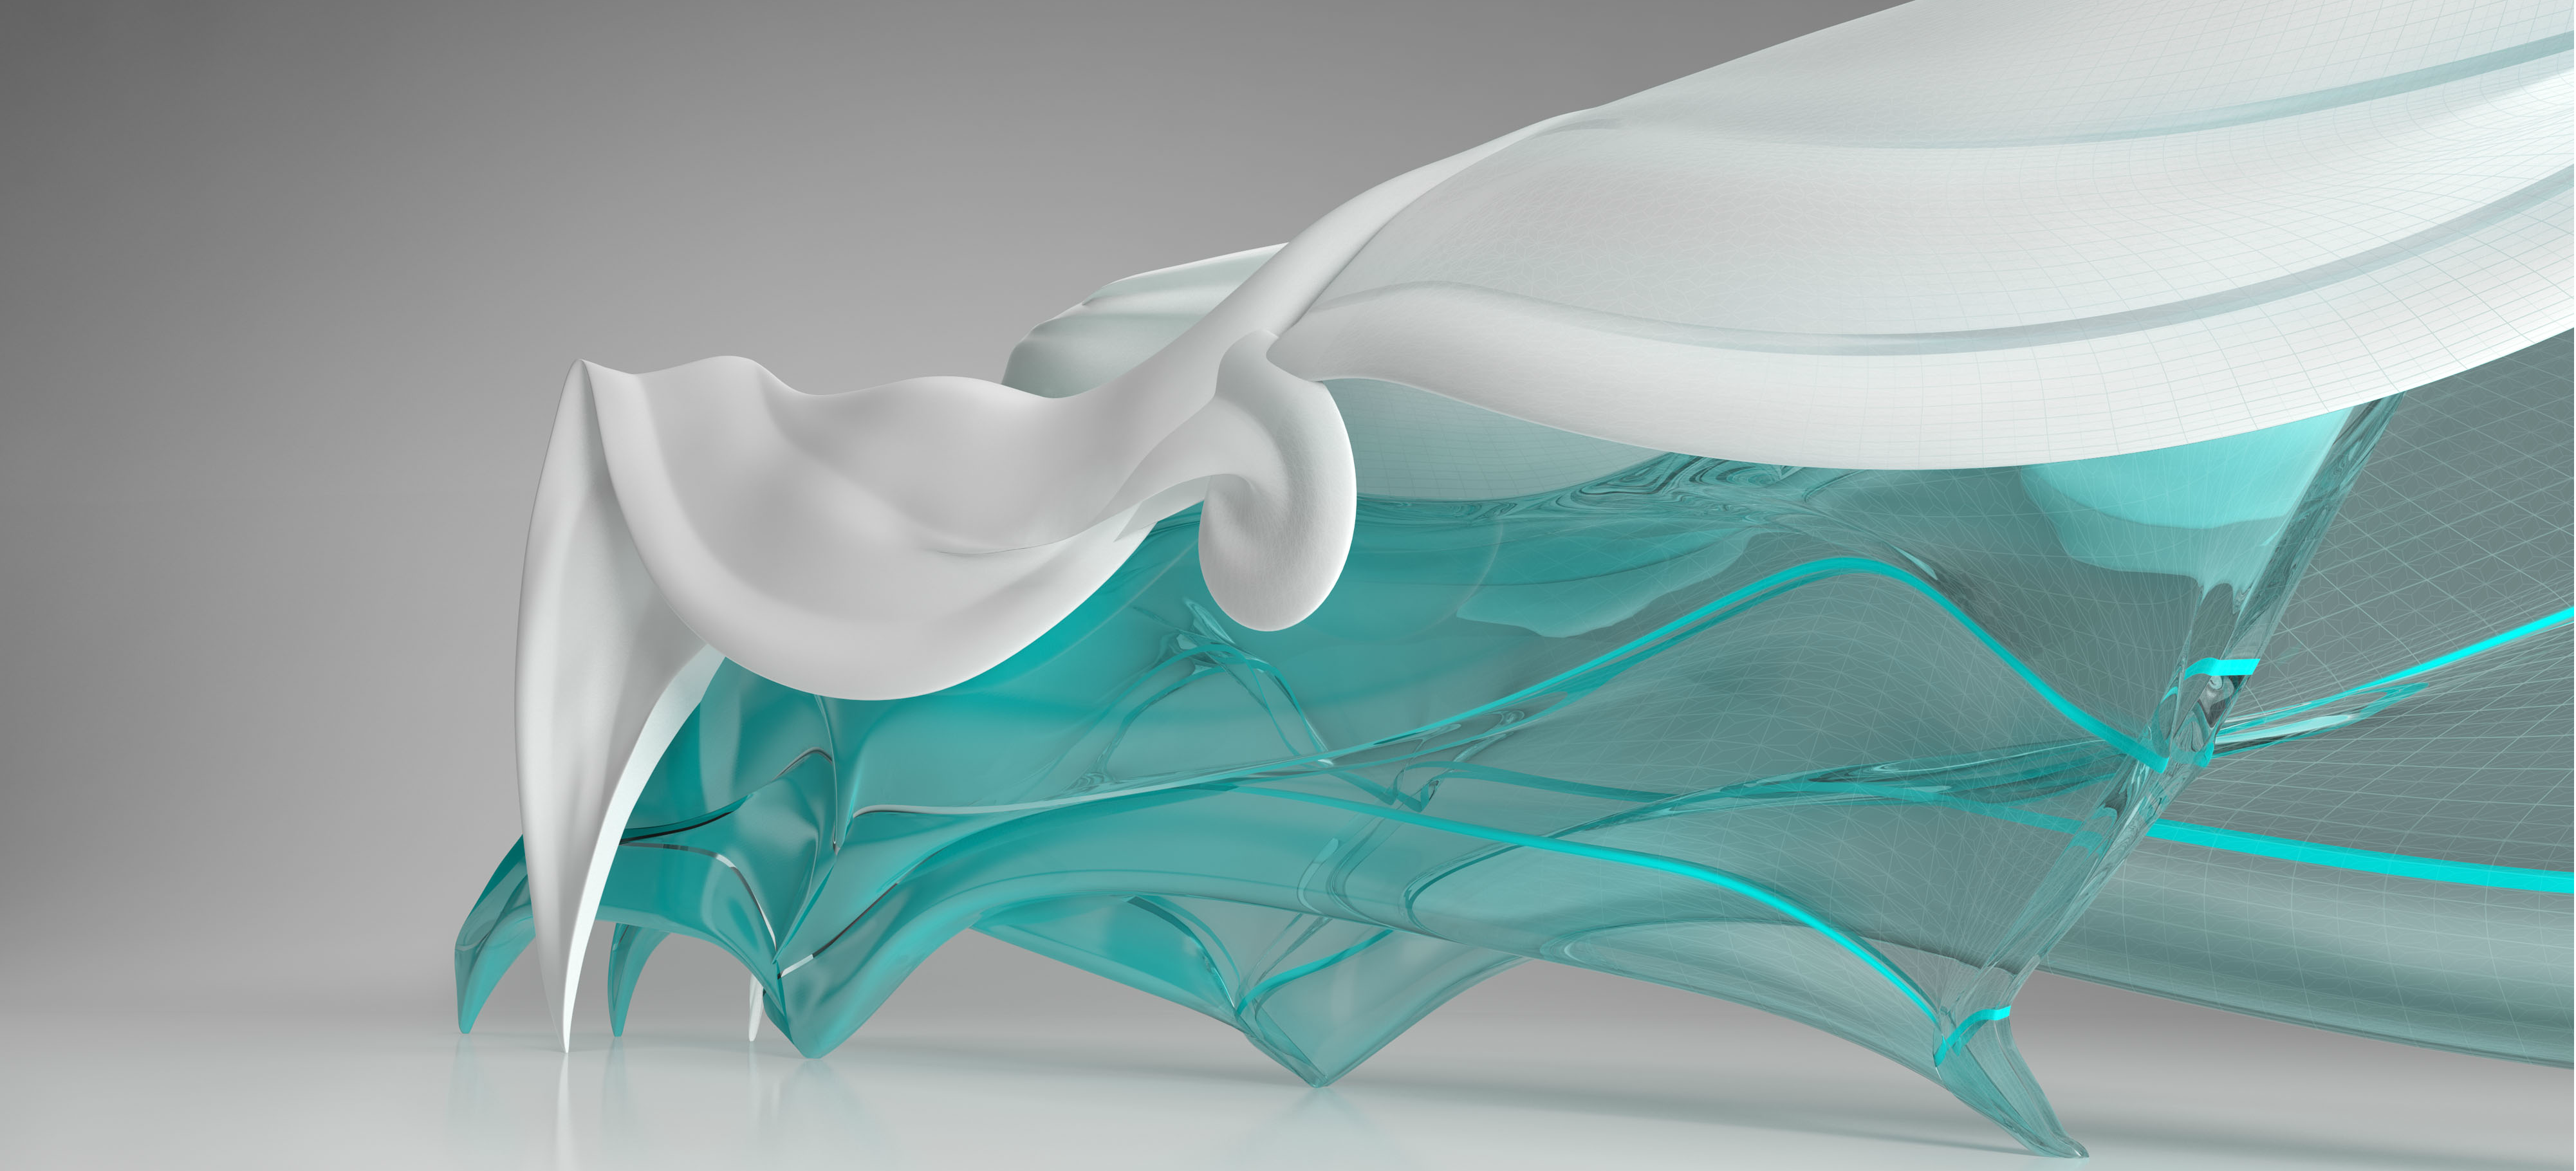 Real-time Xsens MVN in Autodesk Maya 2013 significantly speeds up animation productions